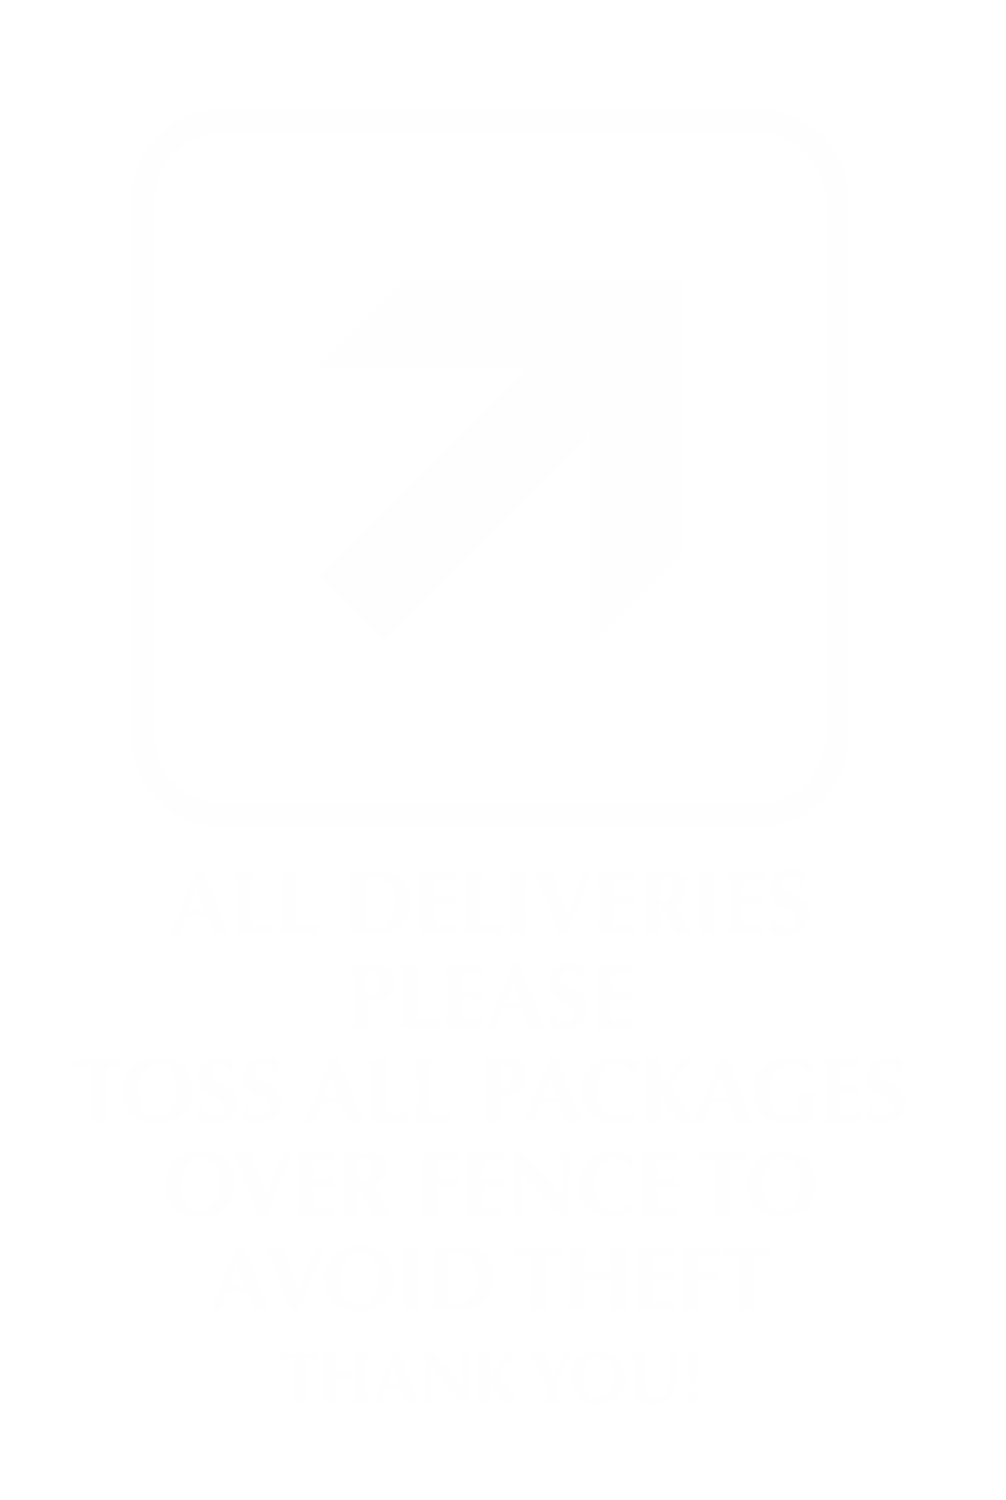 Please Toss All Packages Over Fence Engraved Sign